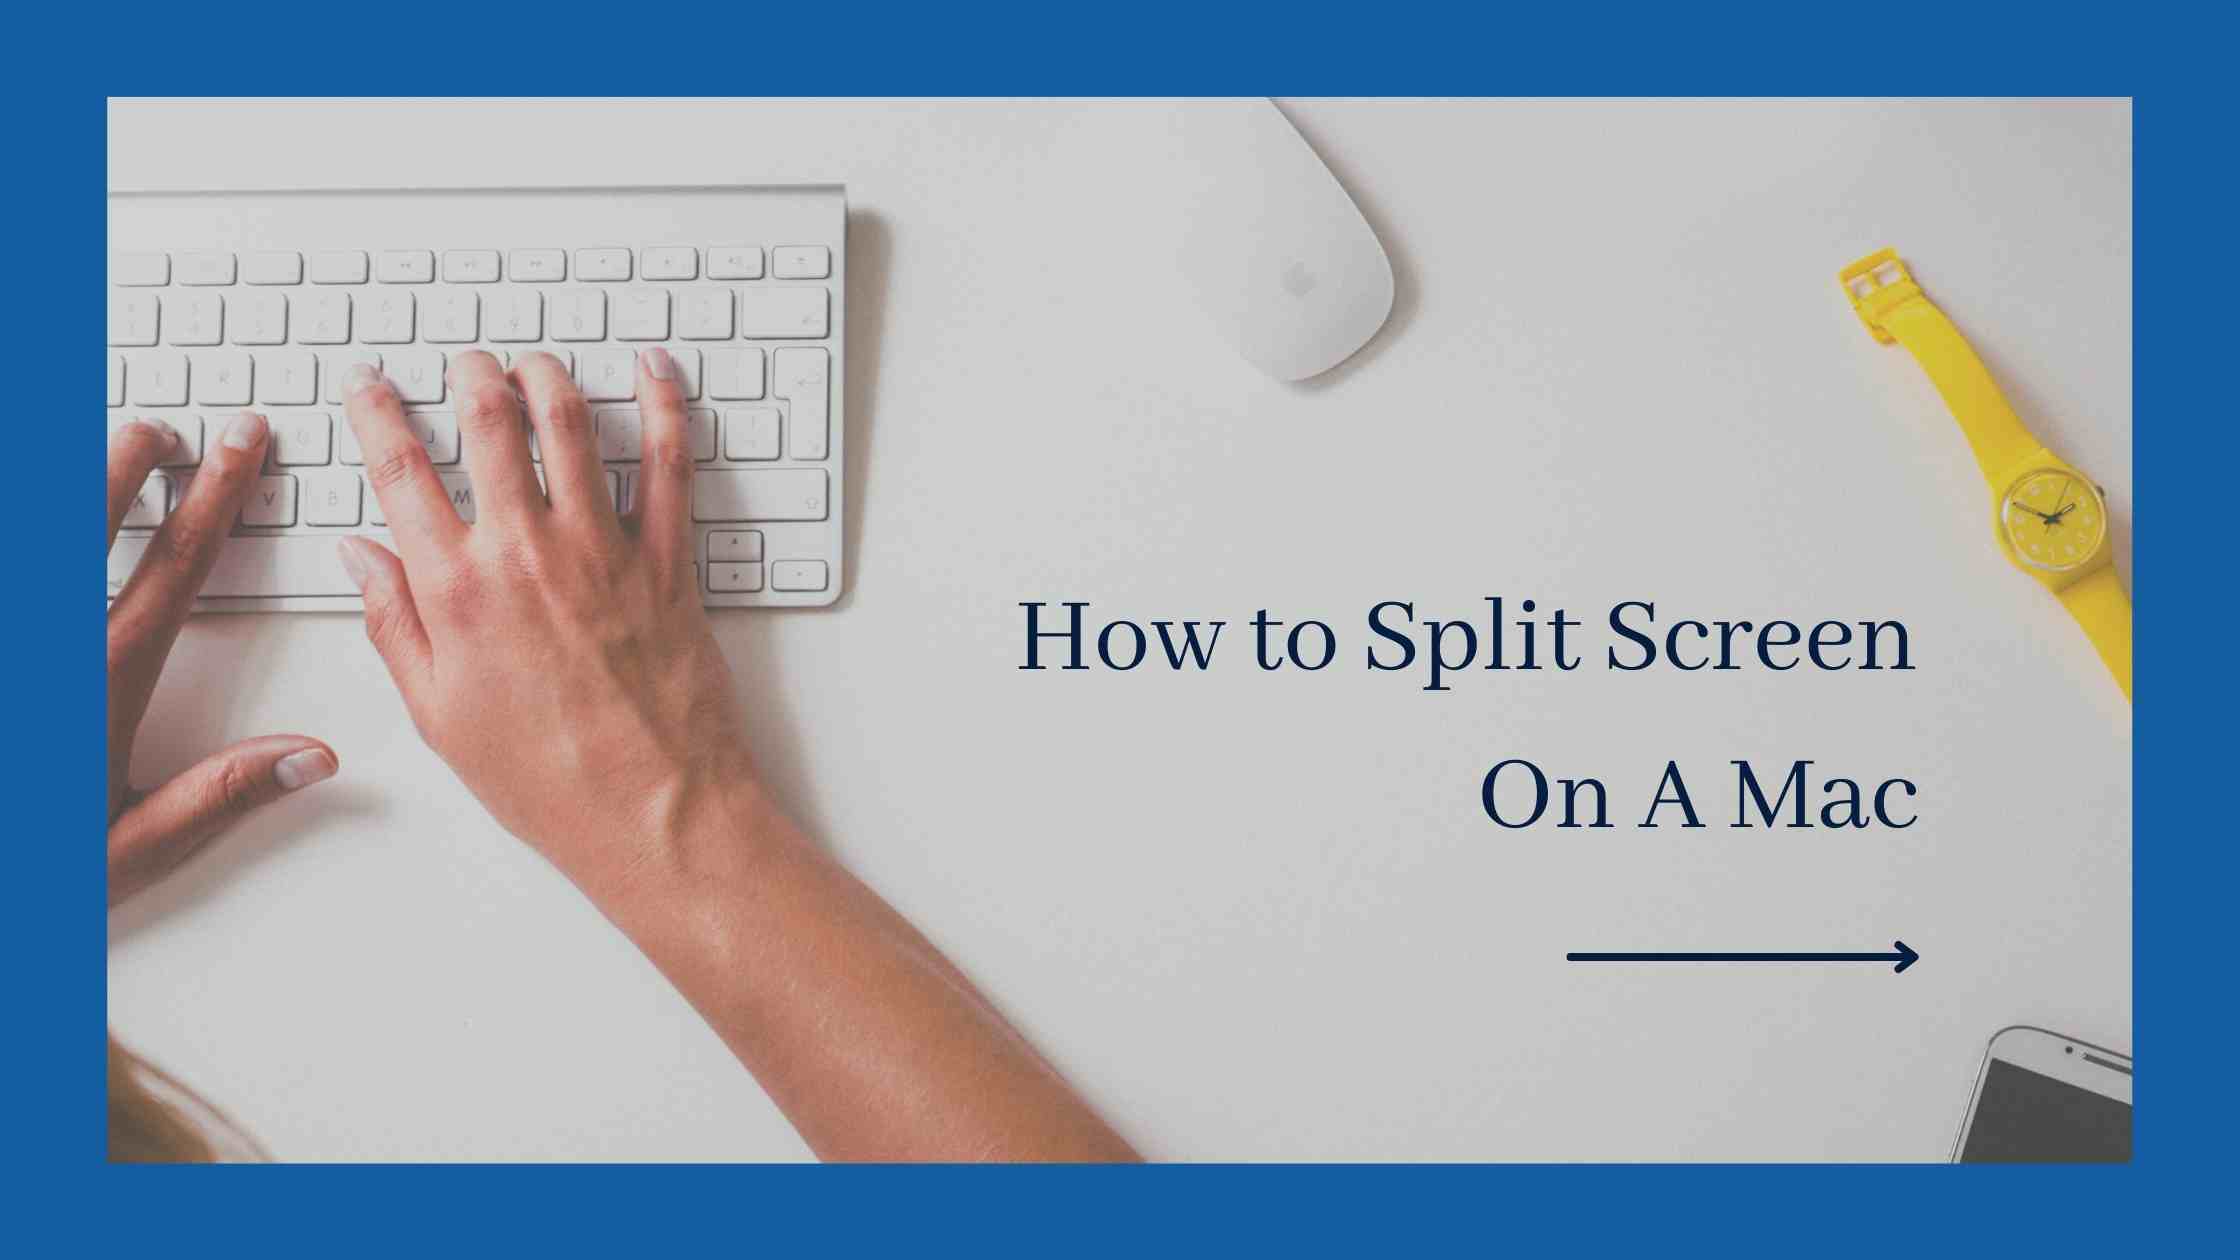 It's very convenient to use a split-screen view on a Mac. It gives the effect of using two monitors in order to work with two applications simultaneously. Here's How.